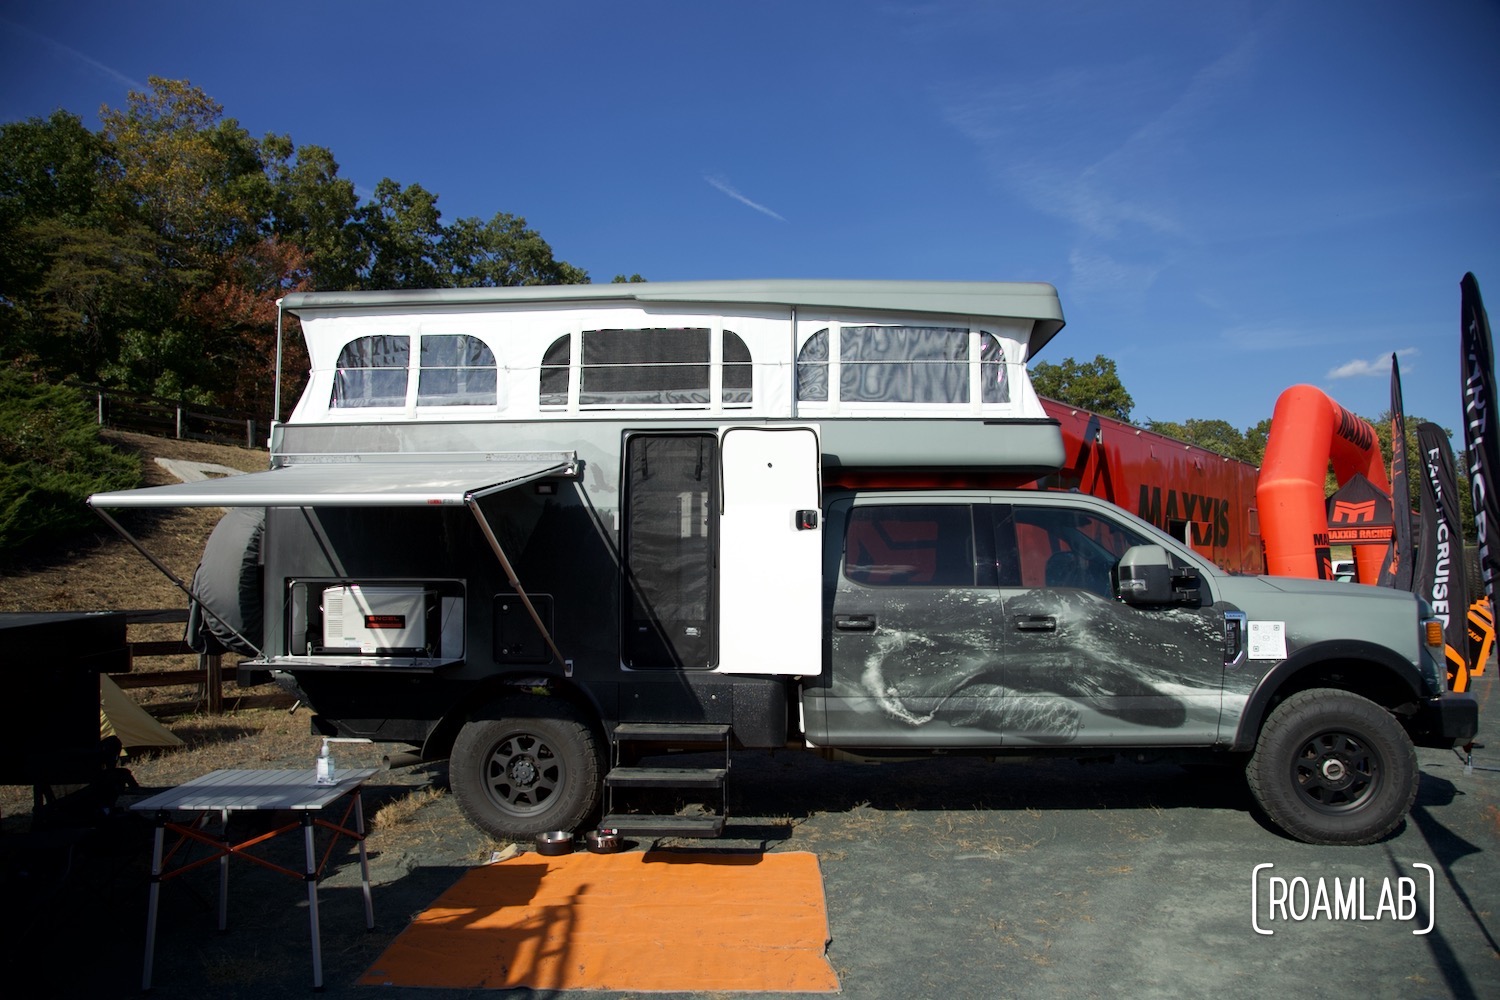 View of an Earth Cruiser overland rig.